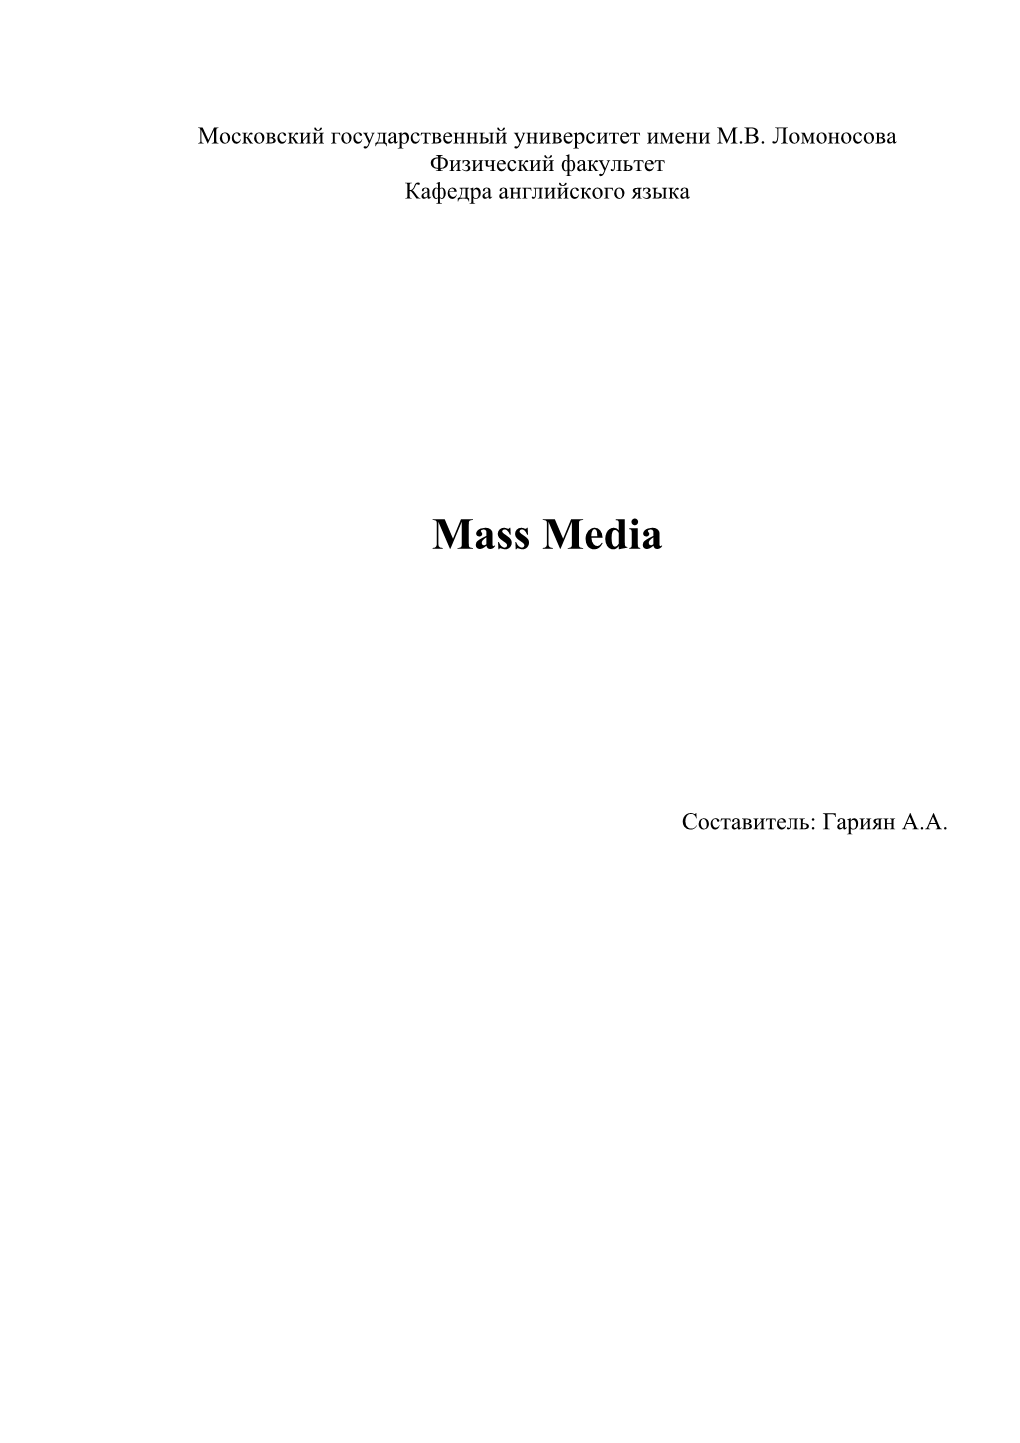 Different Types of Mass Media